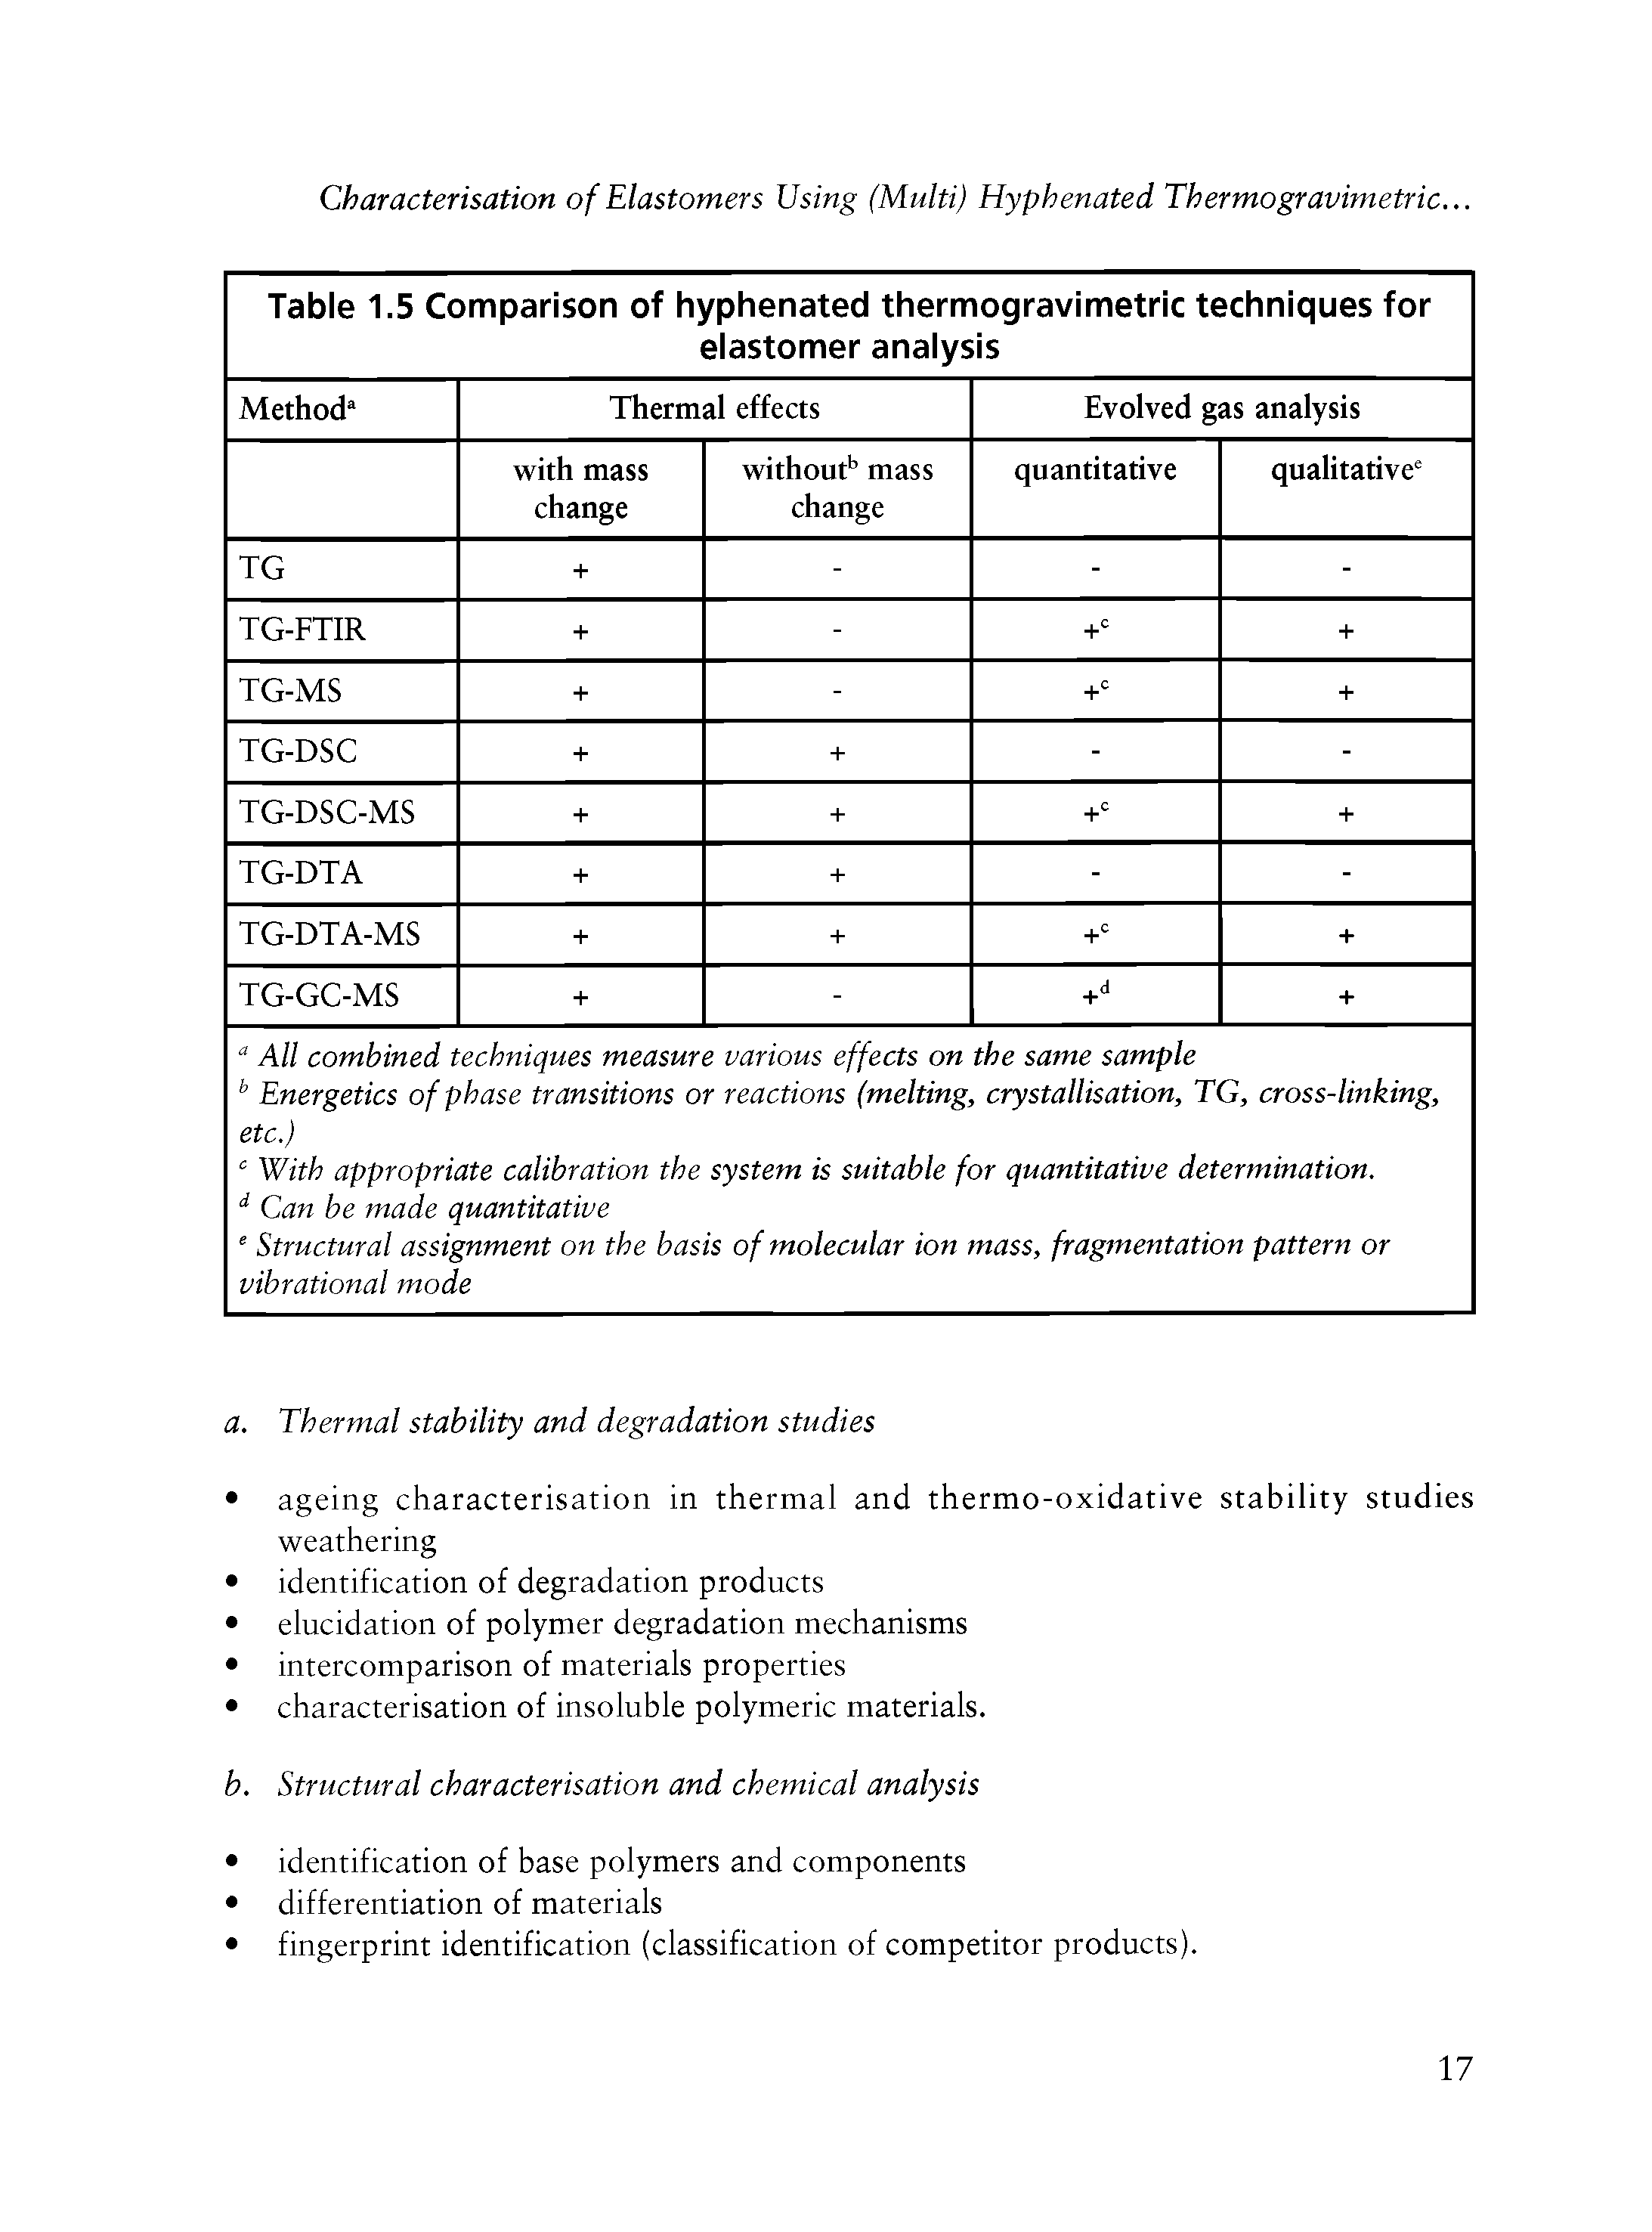 Table 1.5 Comparison of hyphenated thermogravimetric techniques for elastomer analysis ...